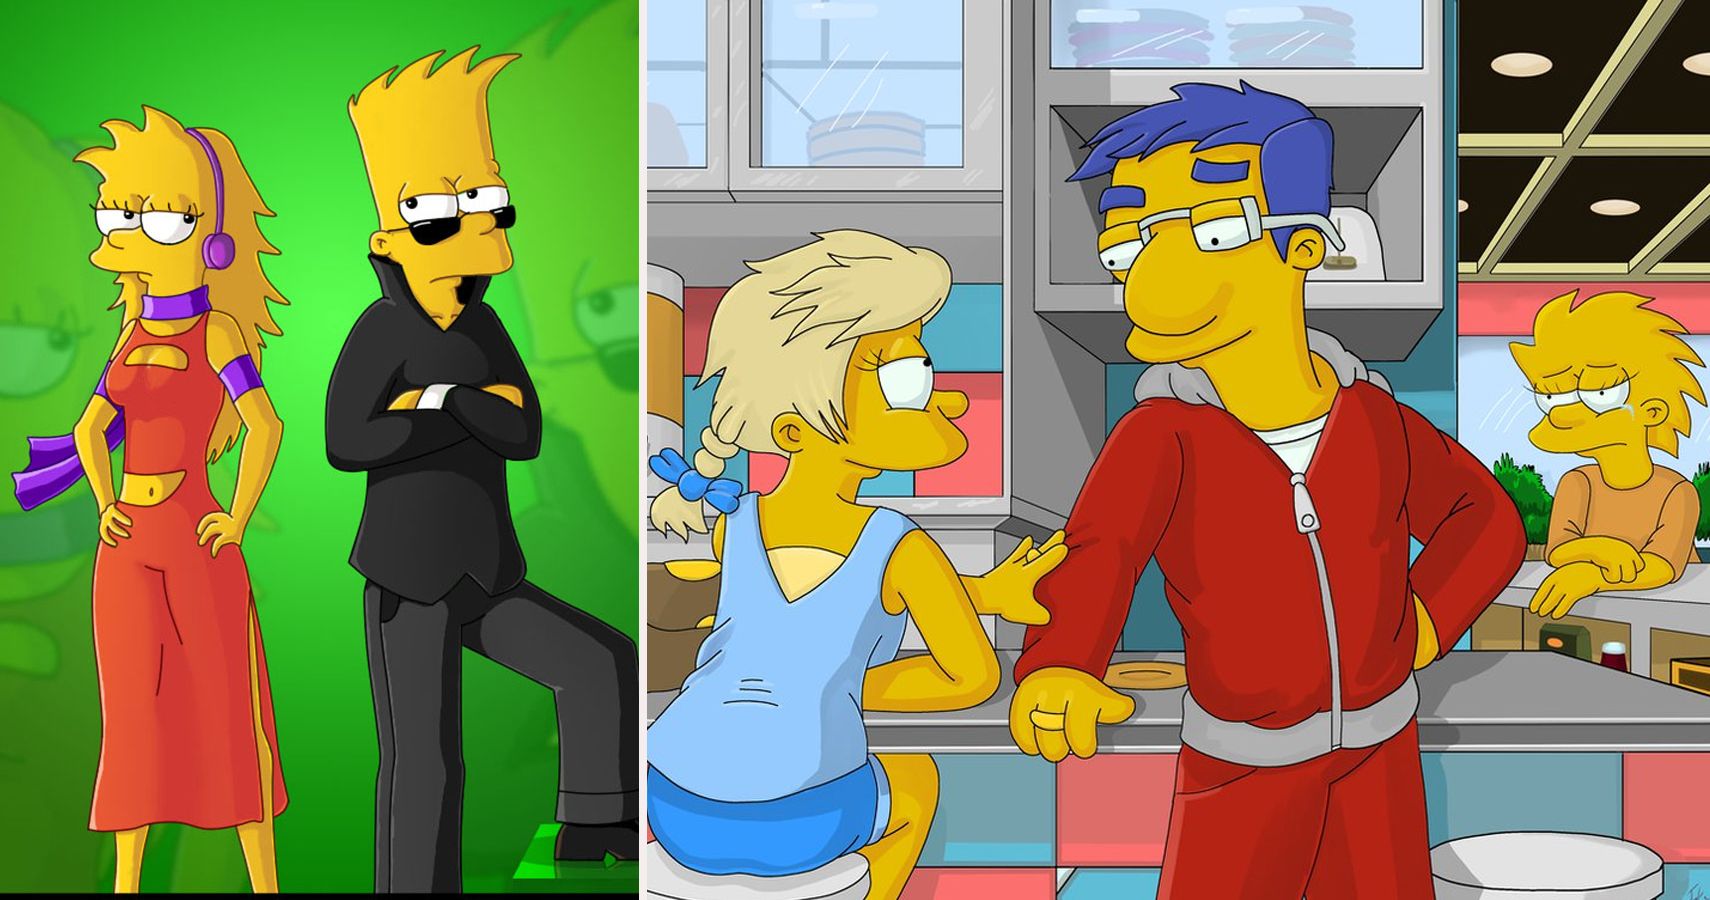 All Grown Up 25 Fan Pictures Of The Simpsons Kids As Adults.